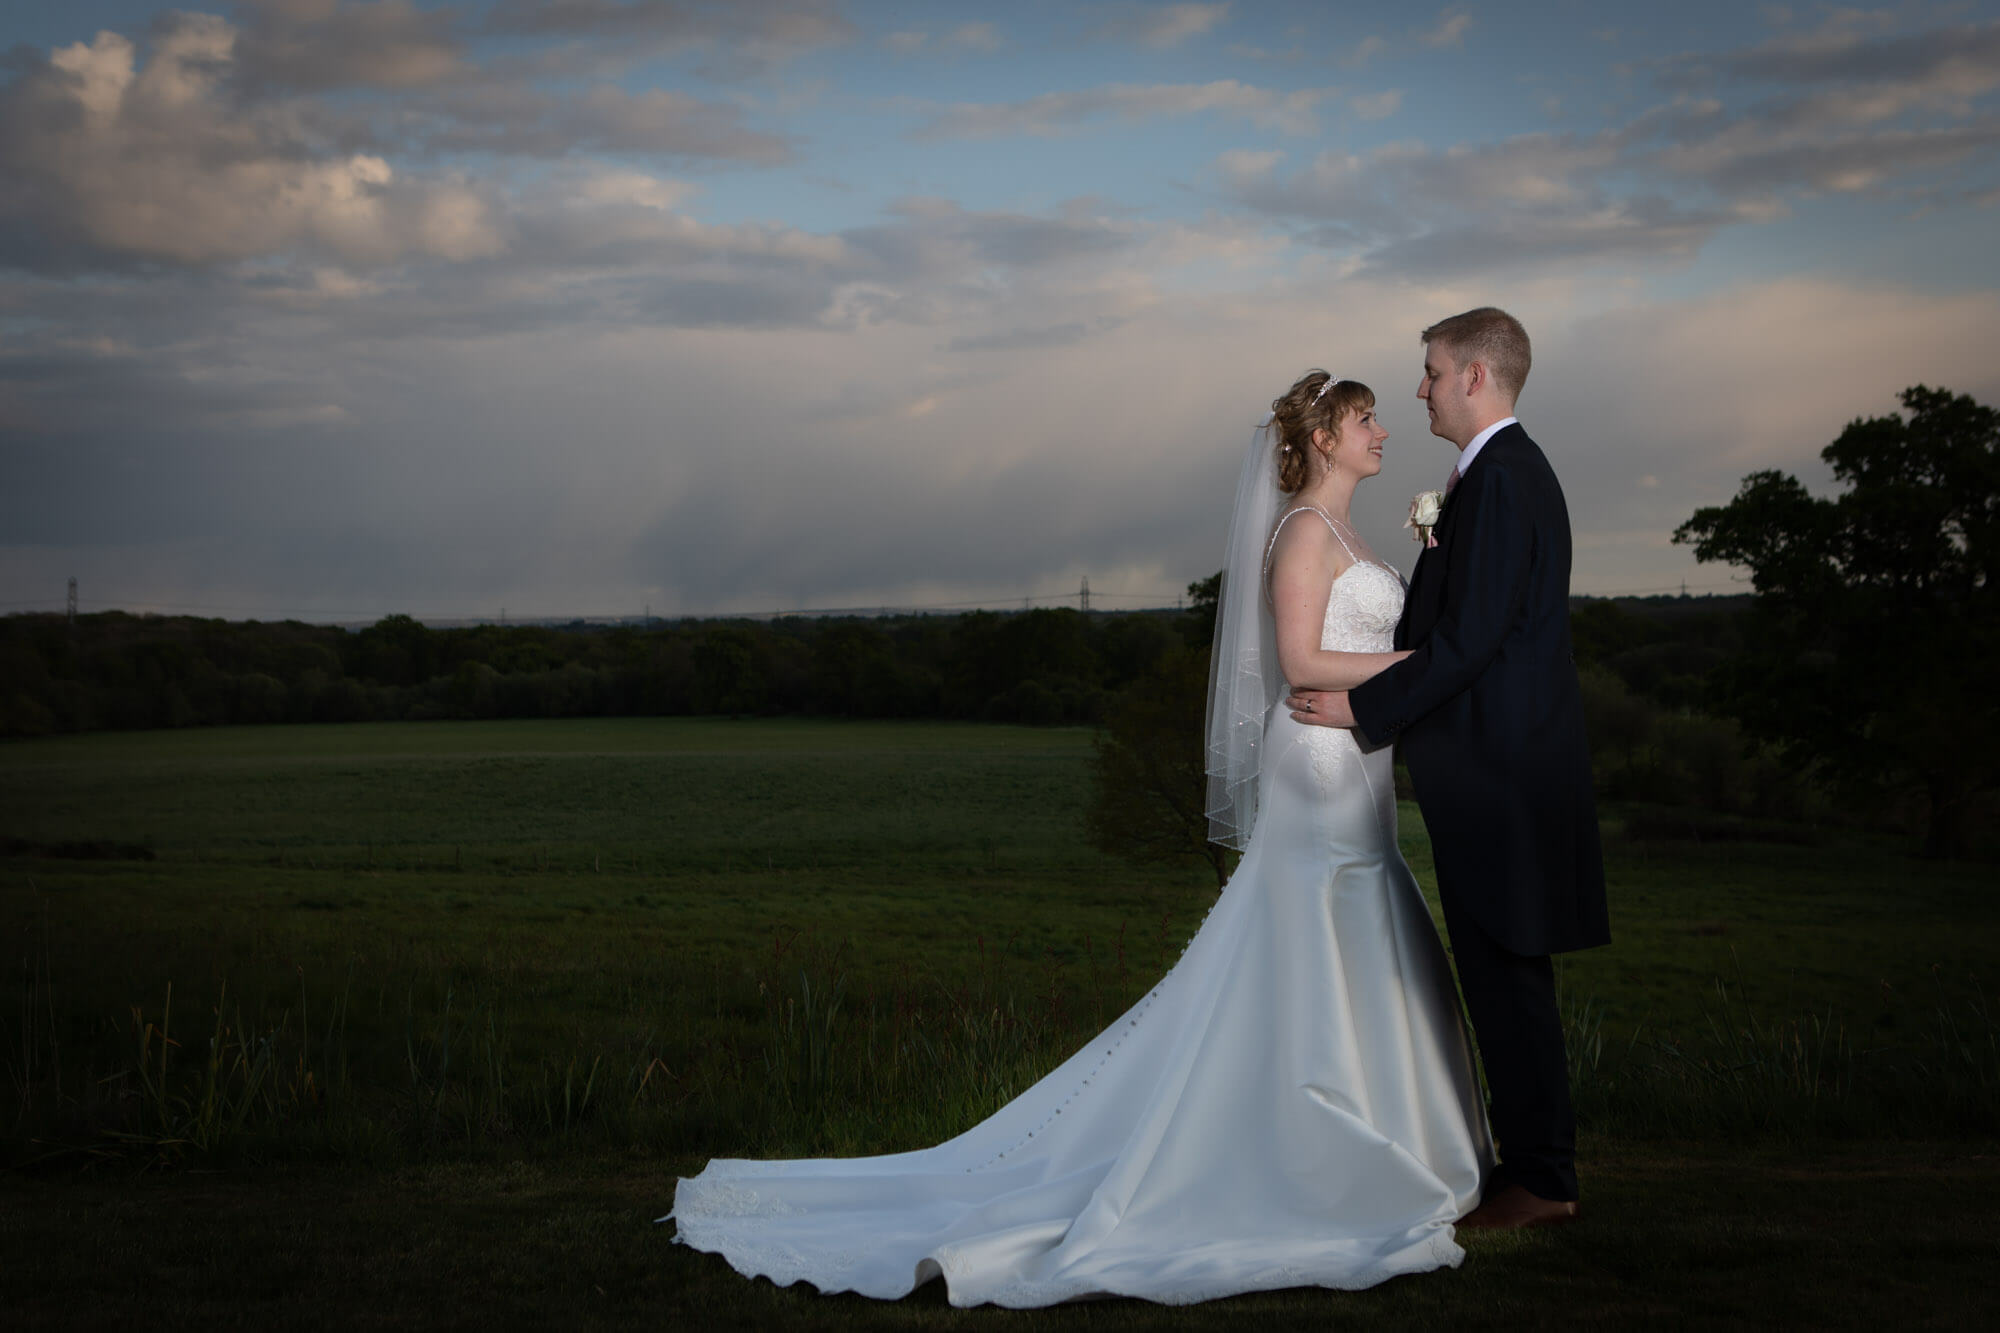 The newly married couple pose together for their photos in the early evening, behind them are rolling fields